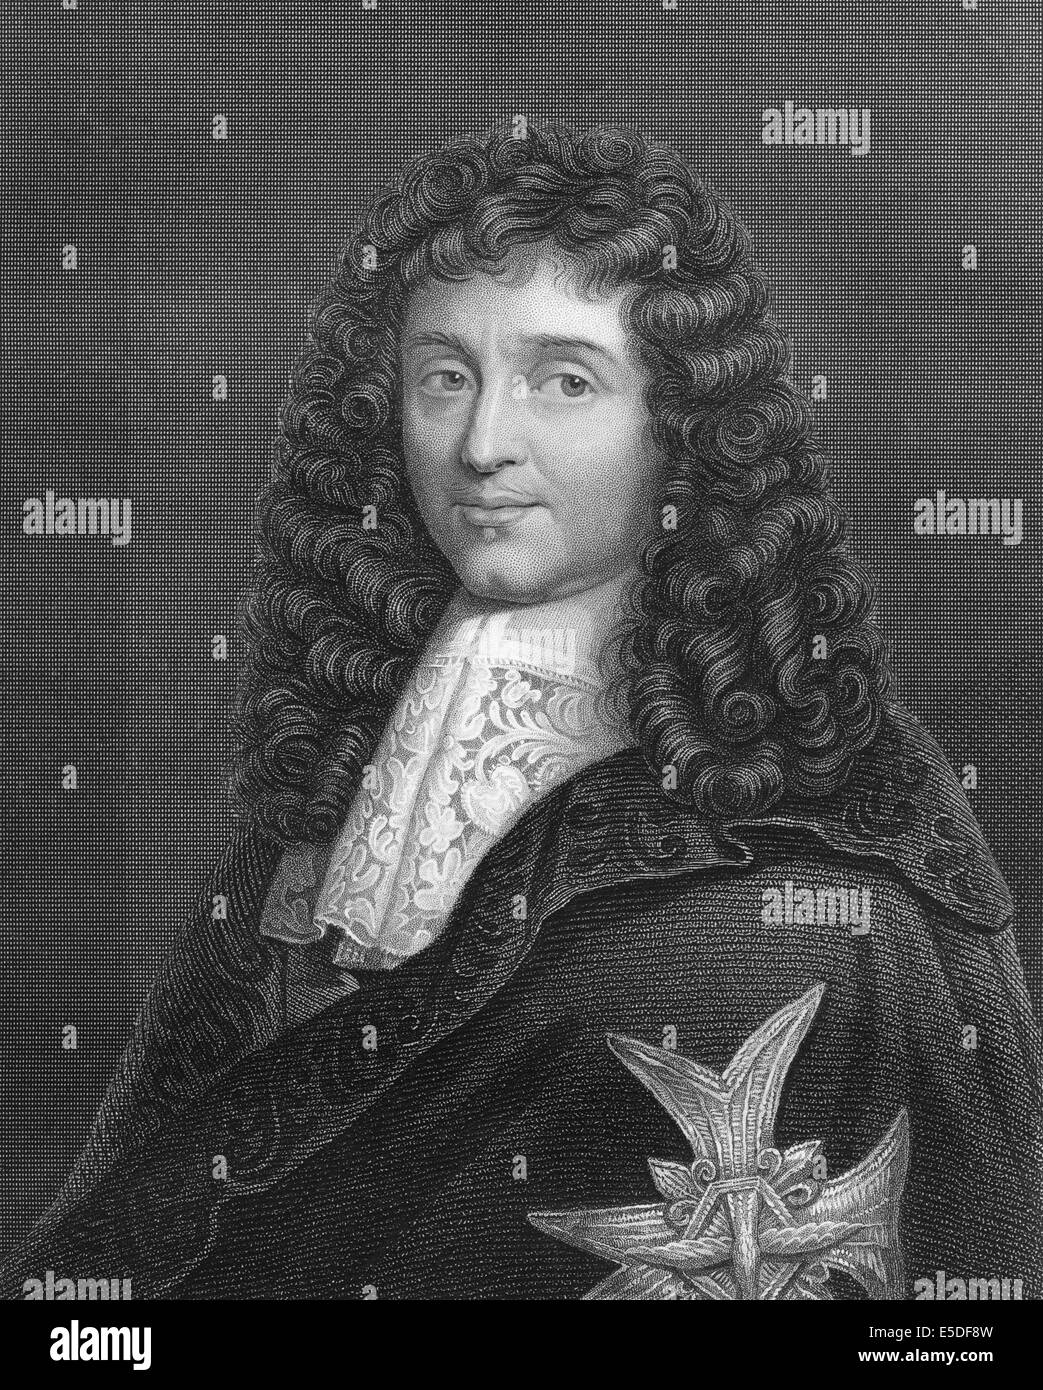 Steel engraving, c. 1860, Jean-Baptiste Colbert, Marquis de Seignelay, 1619 - 1683, a French statesman and finance minister, Stock Photo